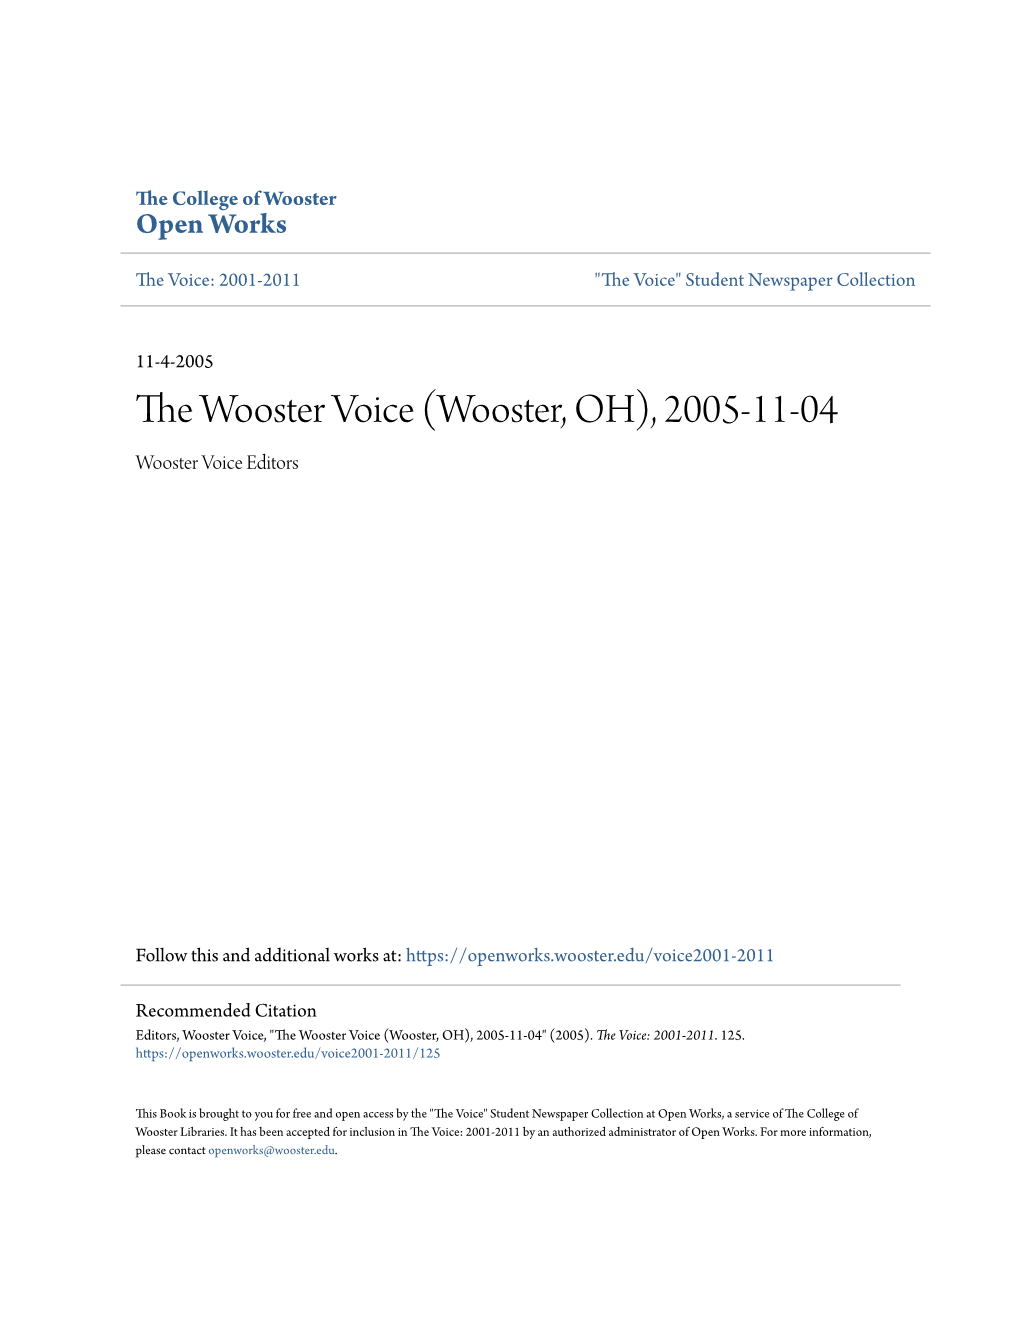 The Wooster Voice